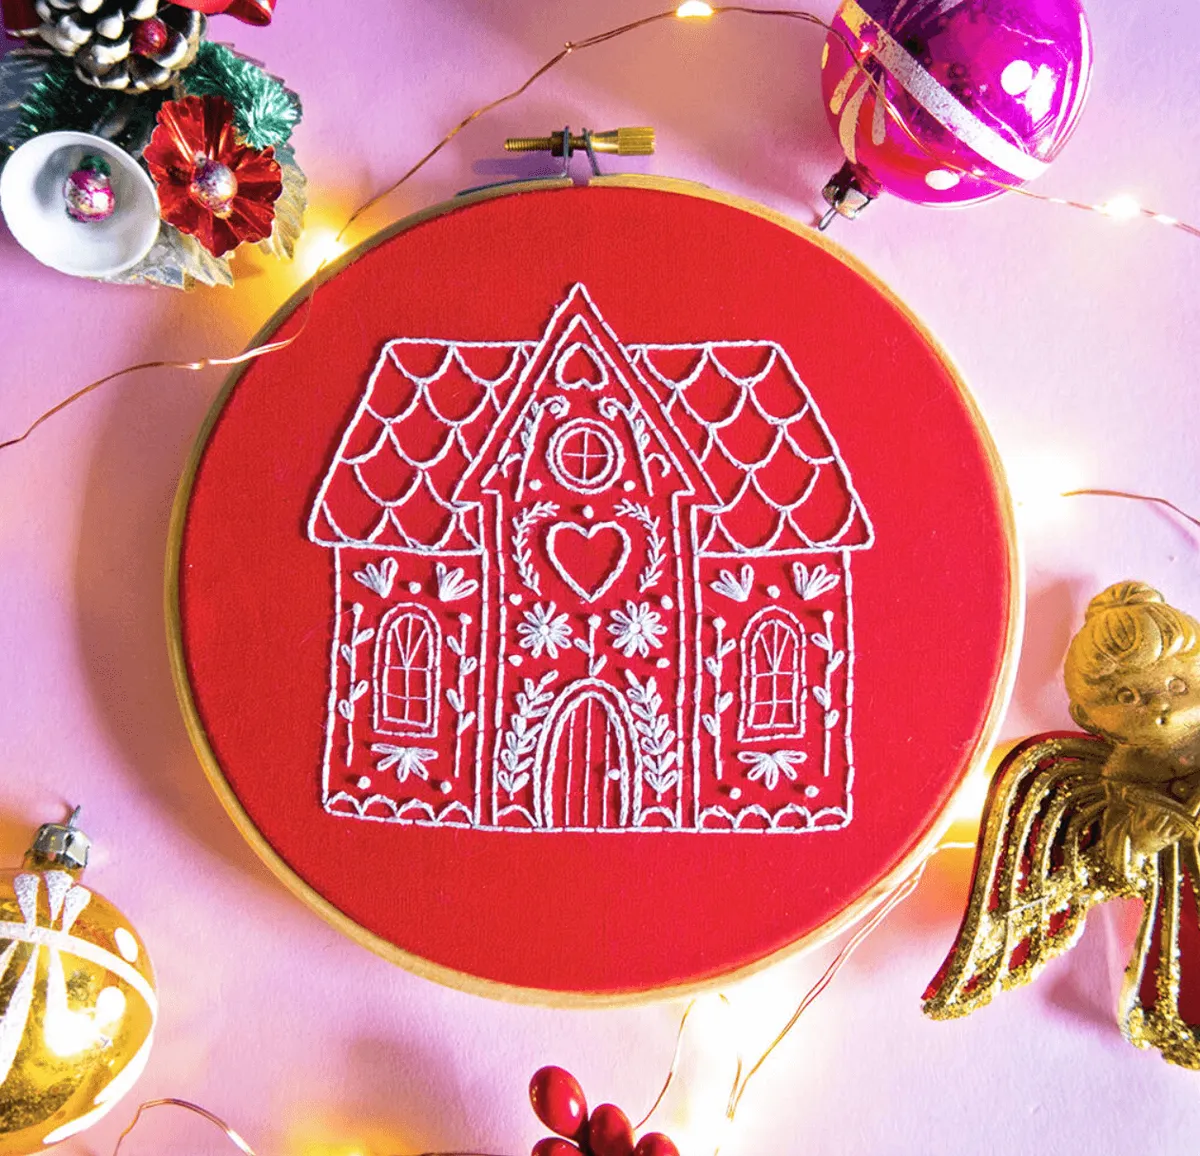 Fourth Day of Christmas Embroidery Kit